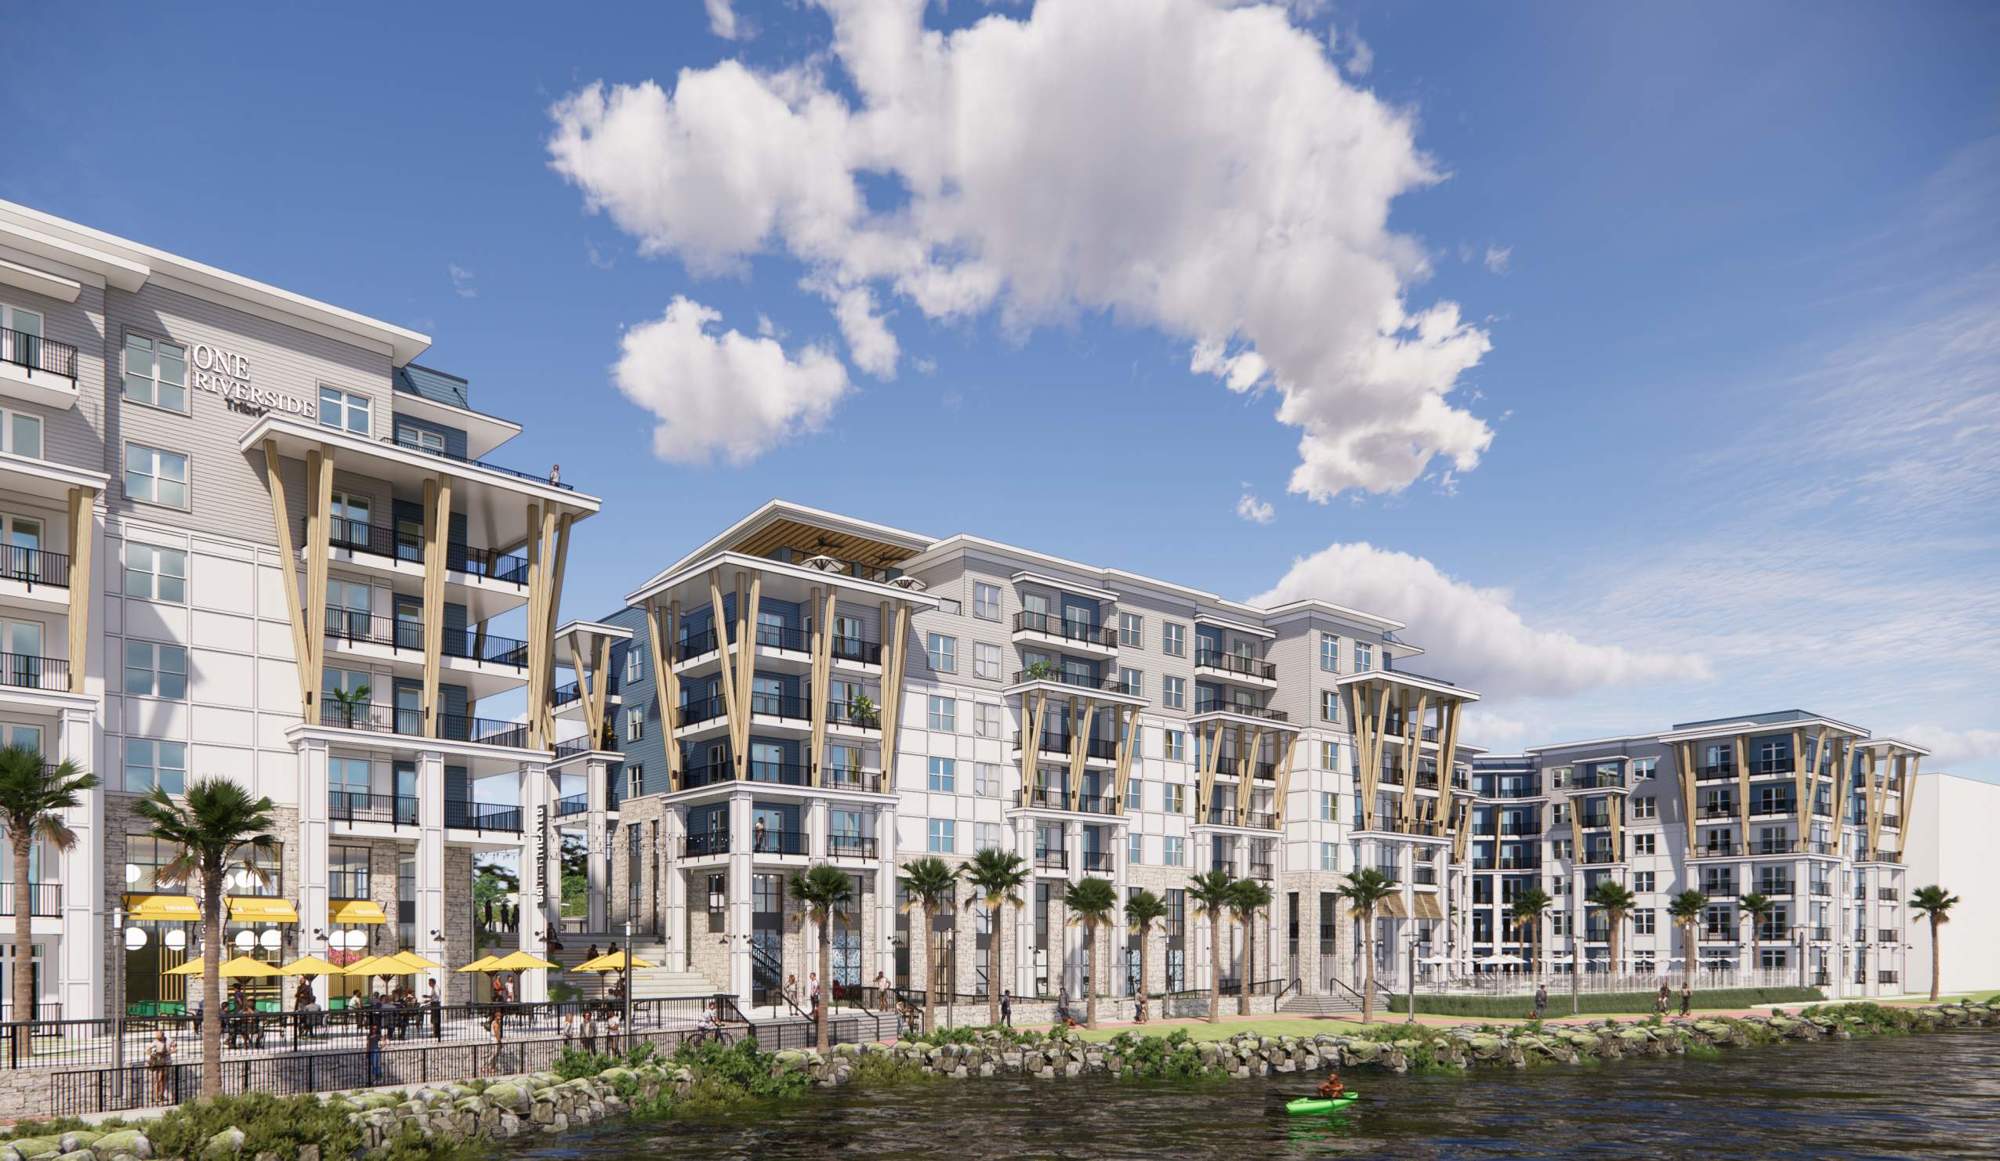 A $250 million project called One Riverside is planned at the former Times-Union site.